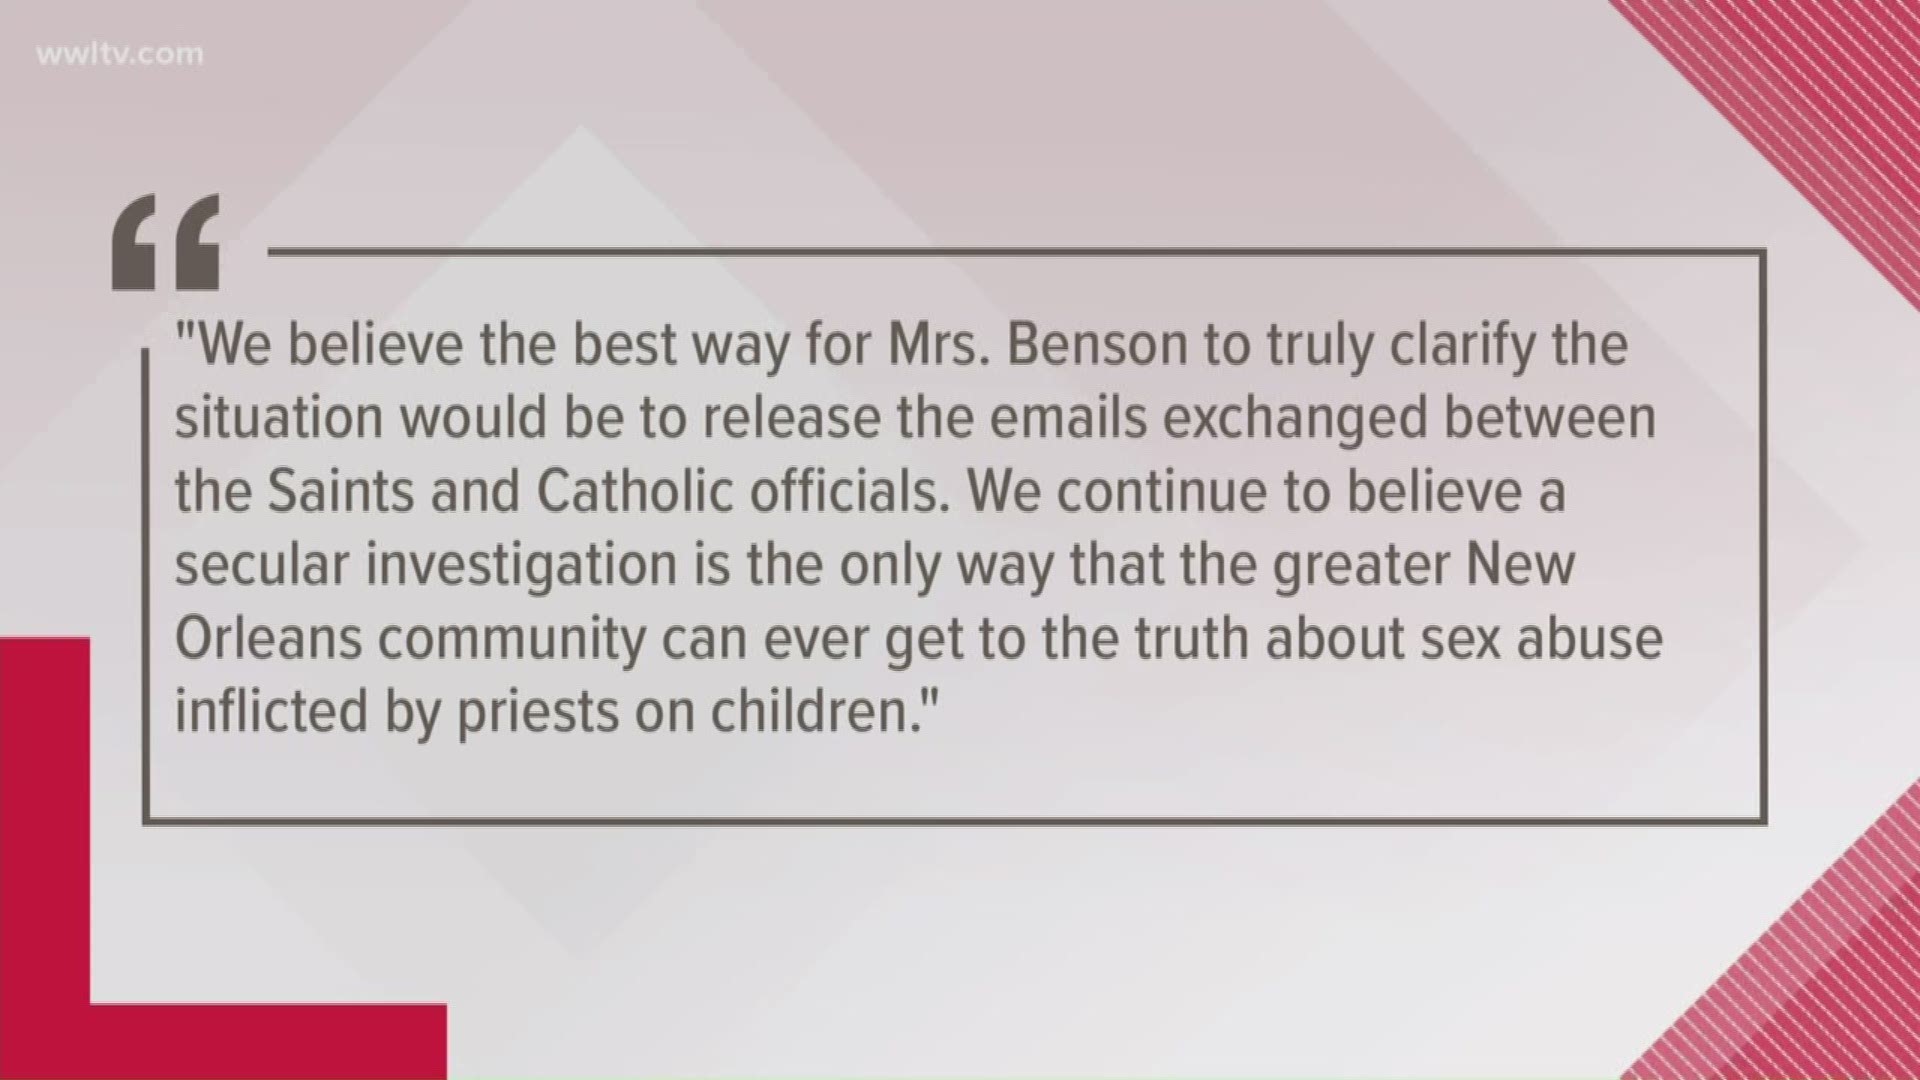 "We believe the best way for Mrs. Benson to truly clarify the situation, would be to release the email exchanges between the Saints and Catholic officials.”